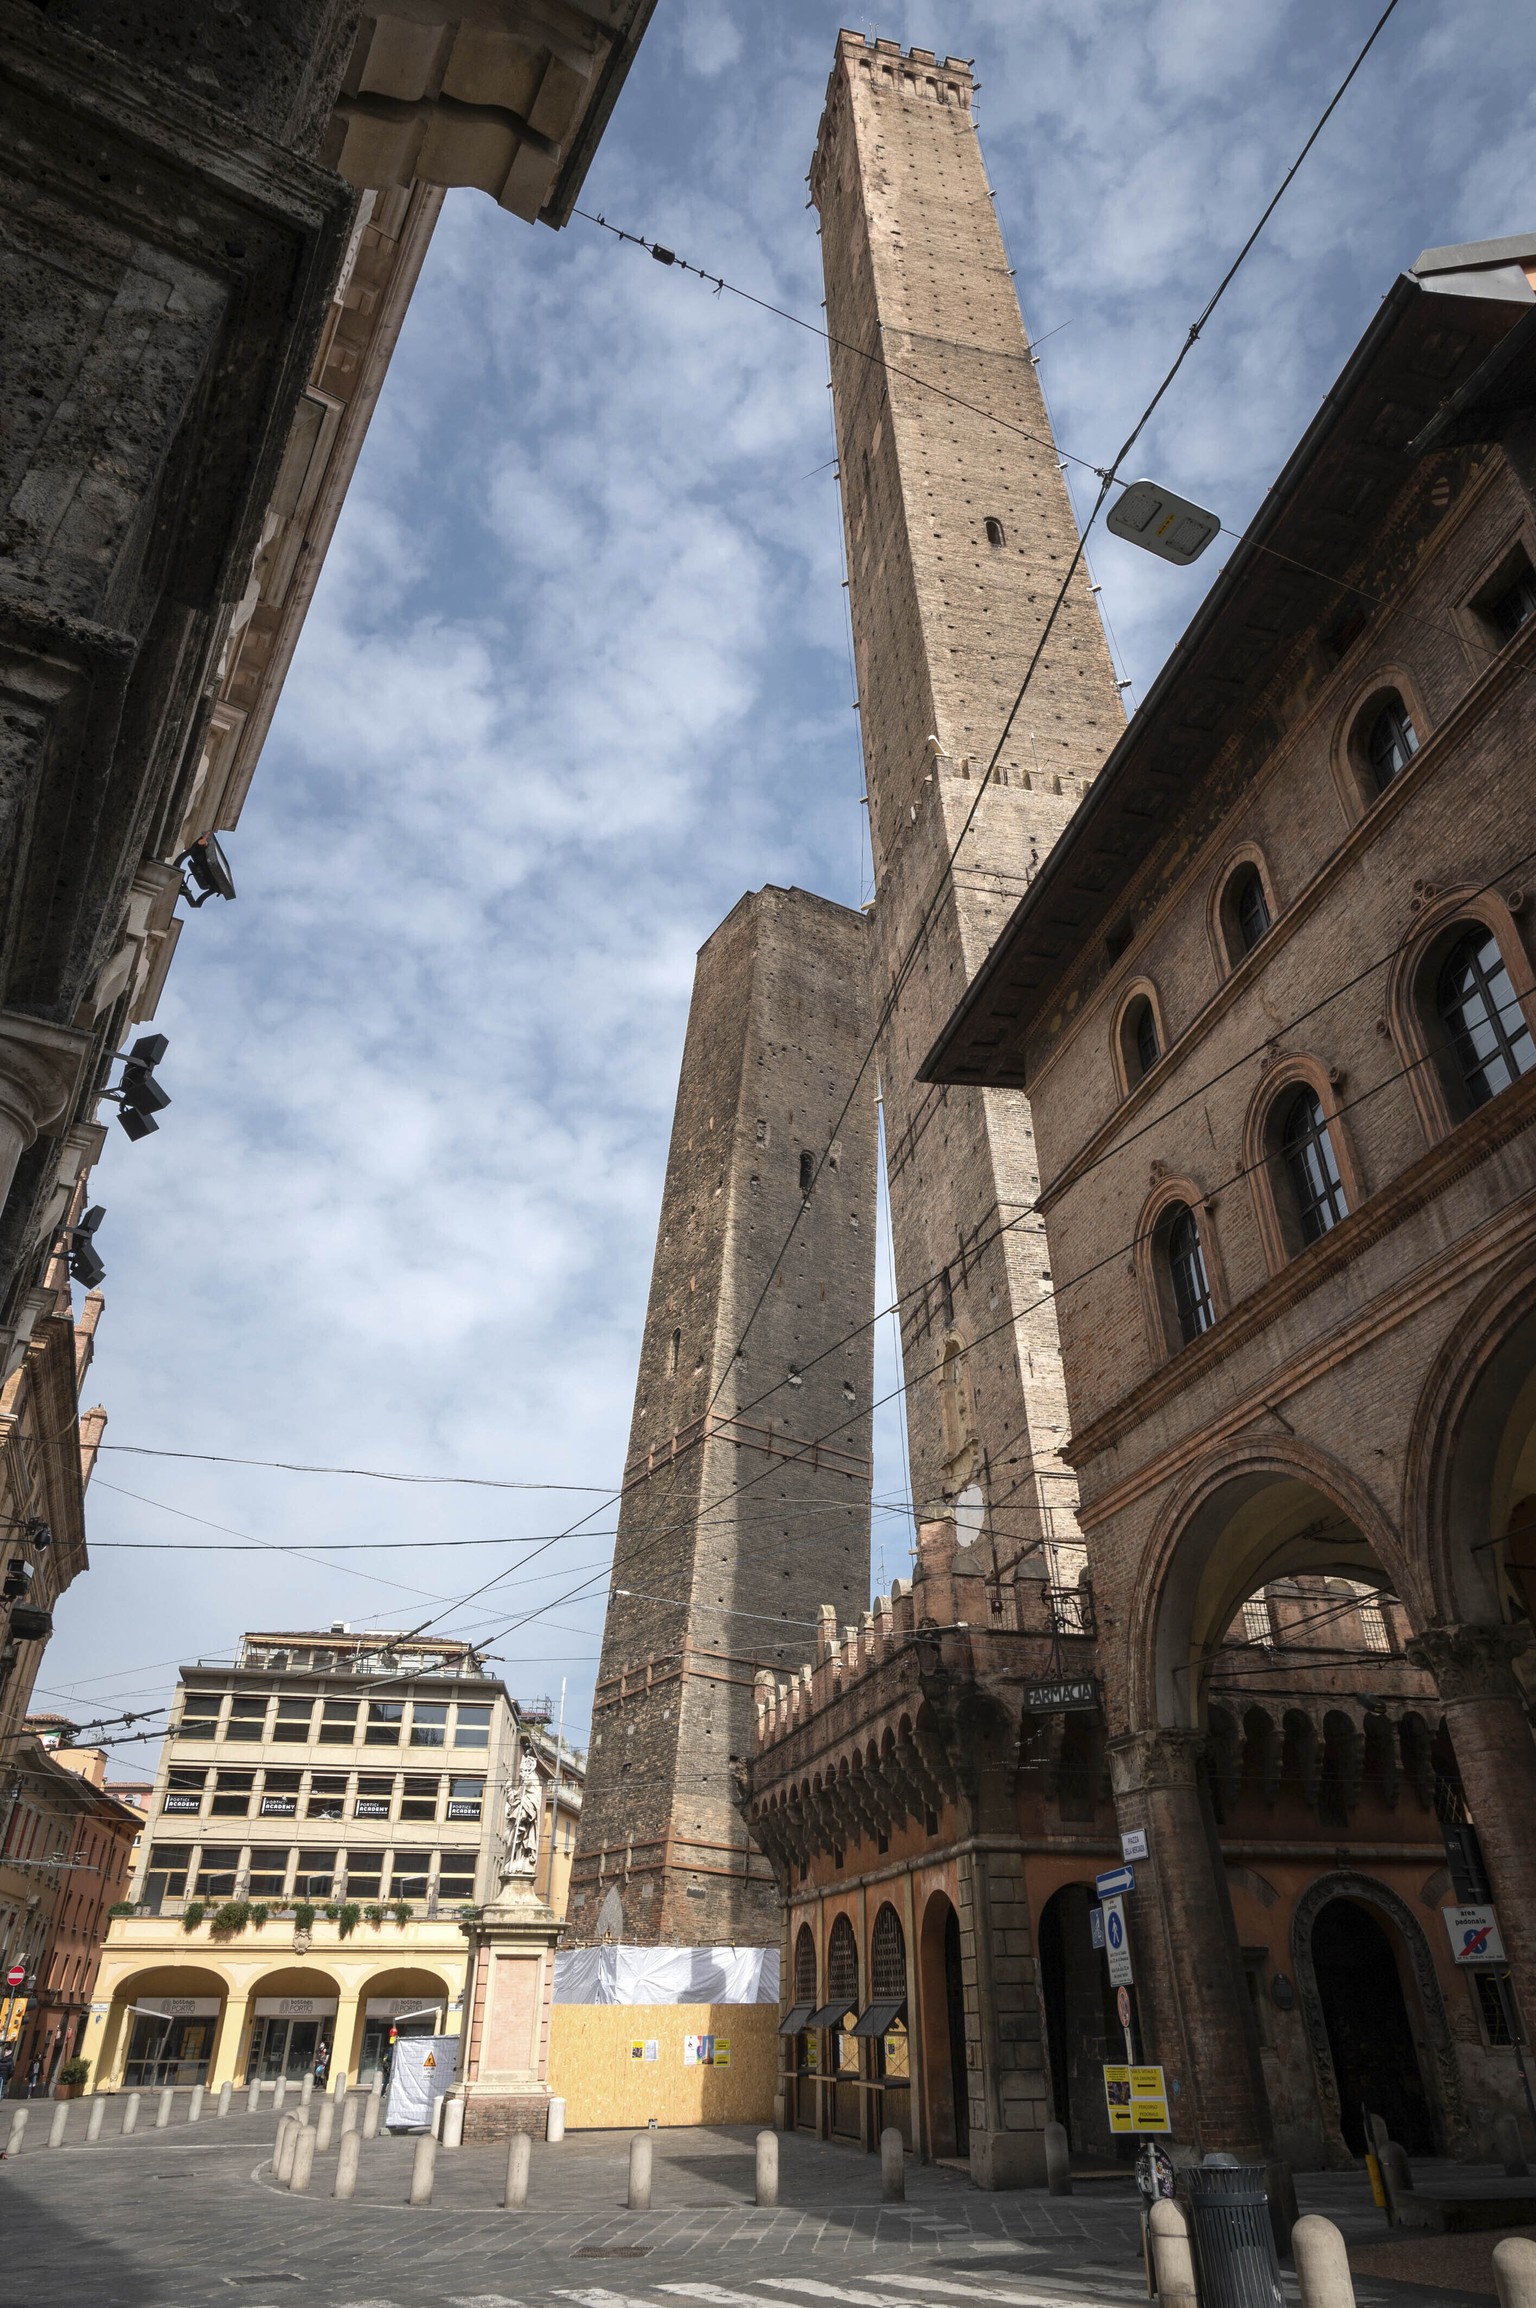 The Garisenda, left, and Asinelli towers are pictured in Bologna, Italy, March 20, 2020. Bologna&#039;s Garisenda tower has been locked down for fear it could collapse. Authorities have provided a sec ...